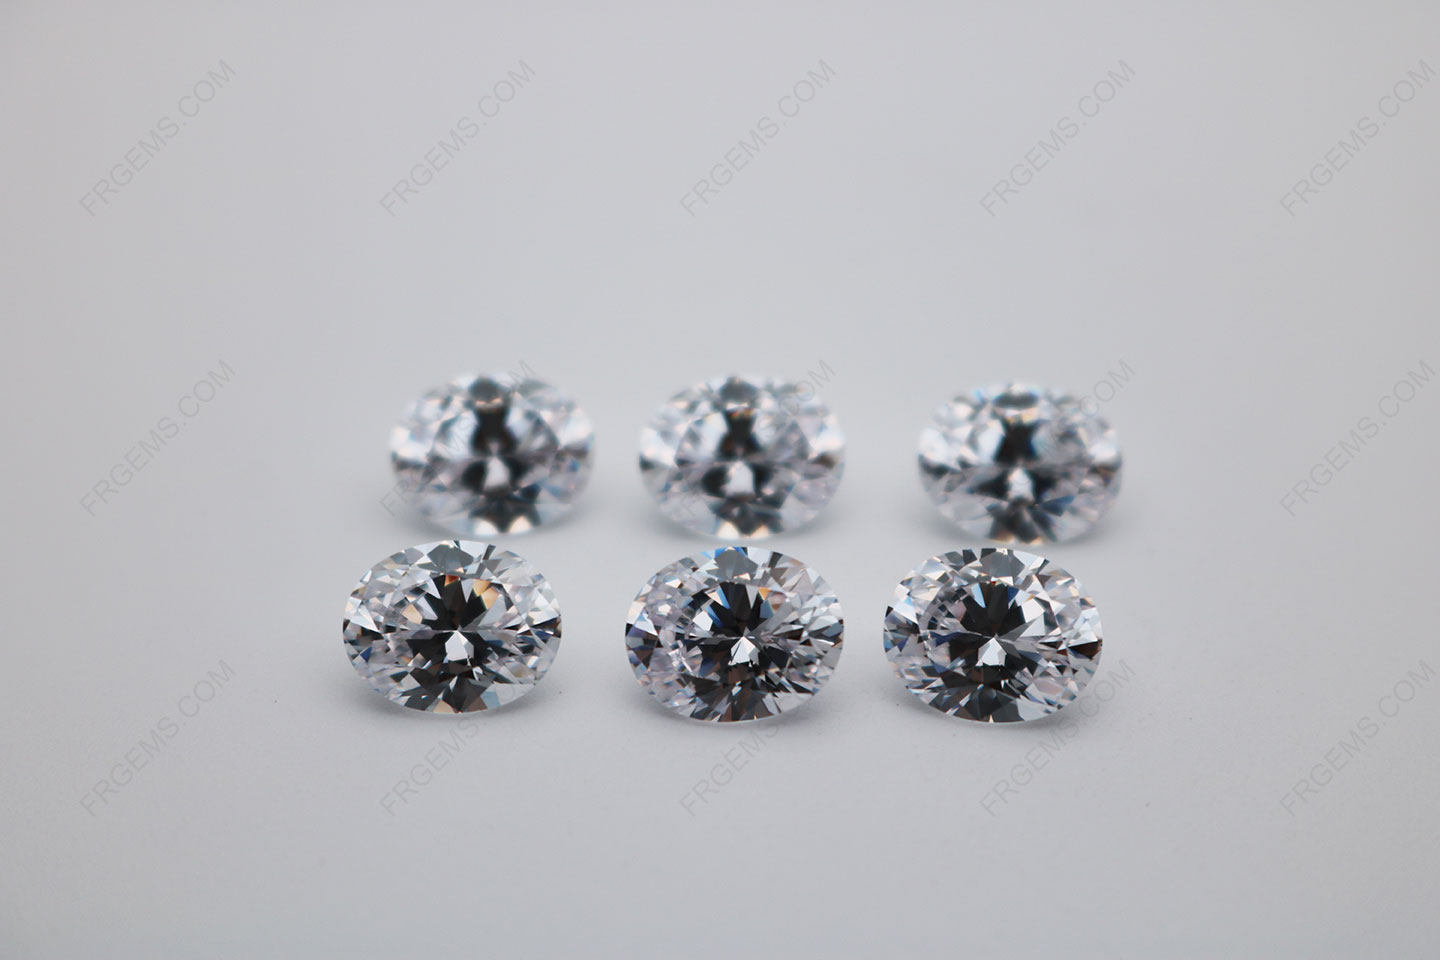 Cubic Zirconia White Color 5A Best Quality Oval Shape faceted Cut 10x8mm stones CZ01 IMG_0668